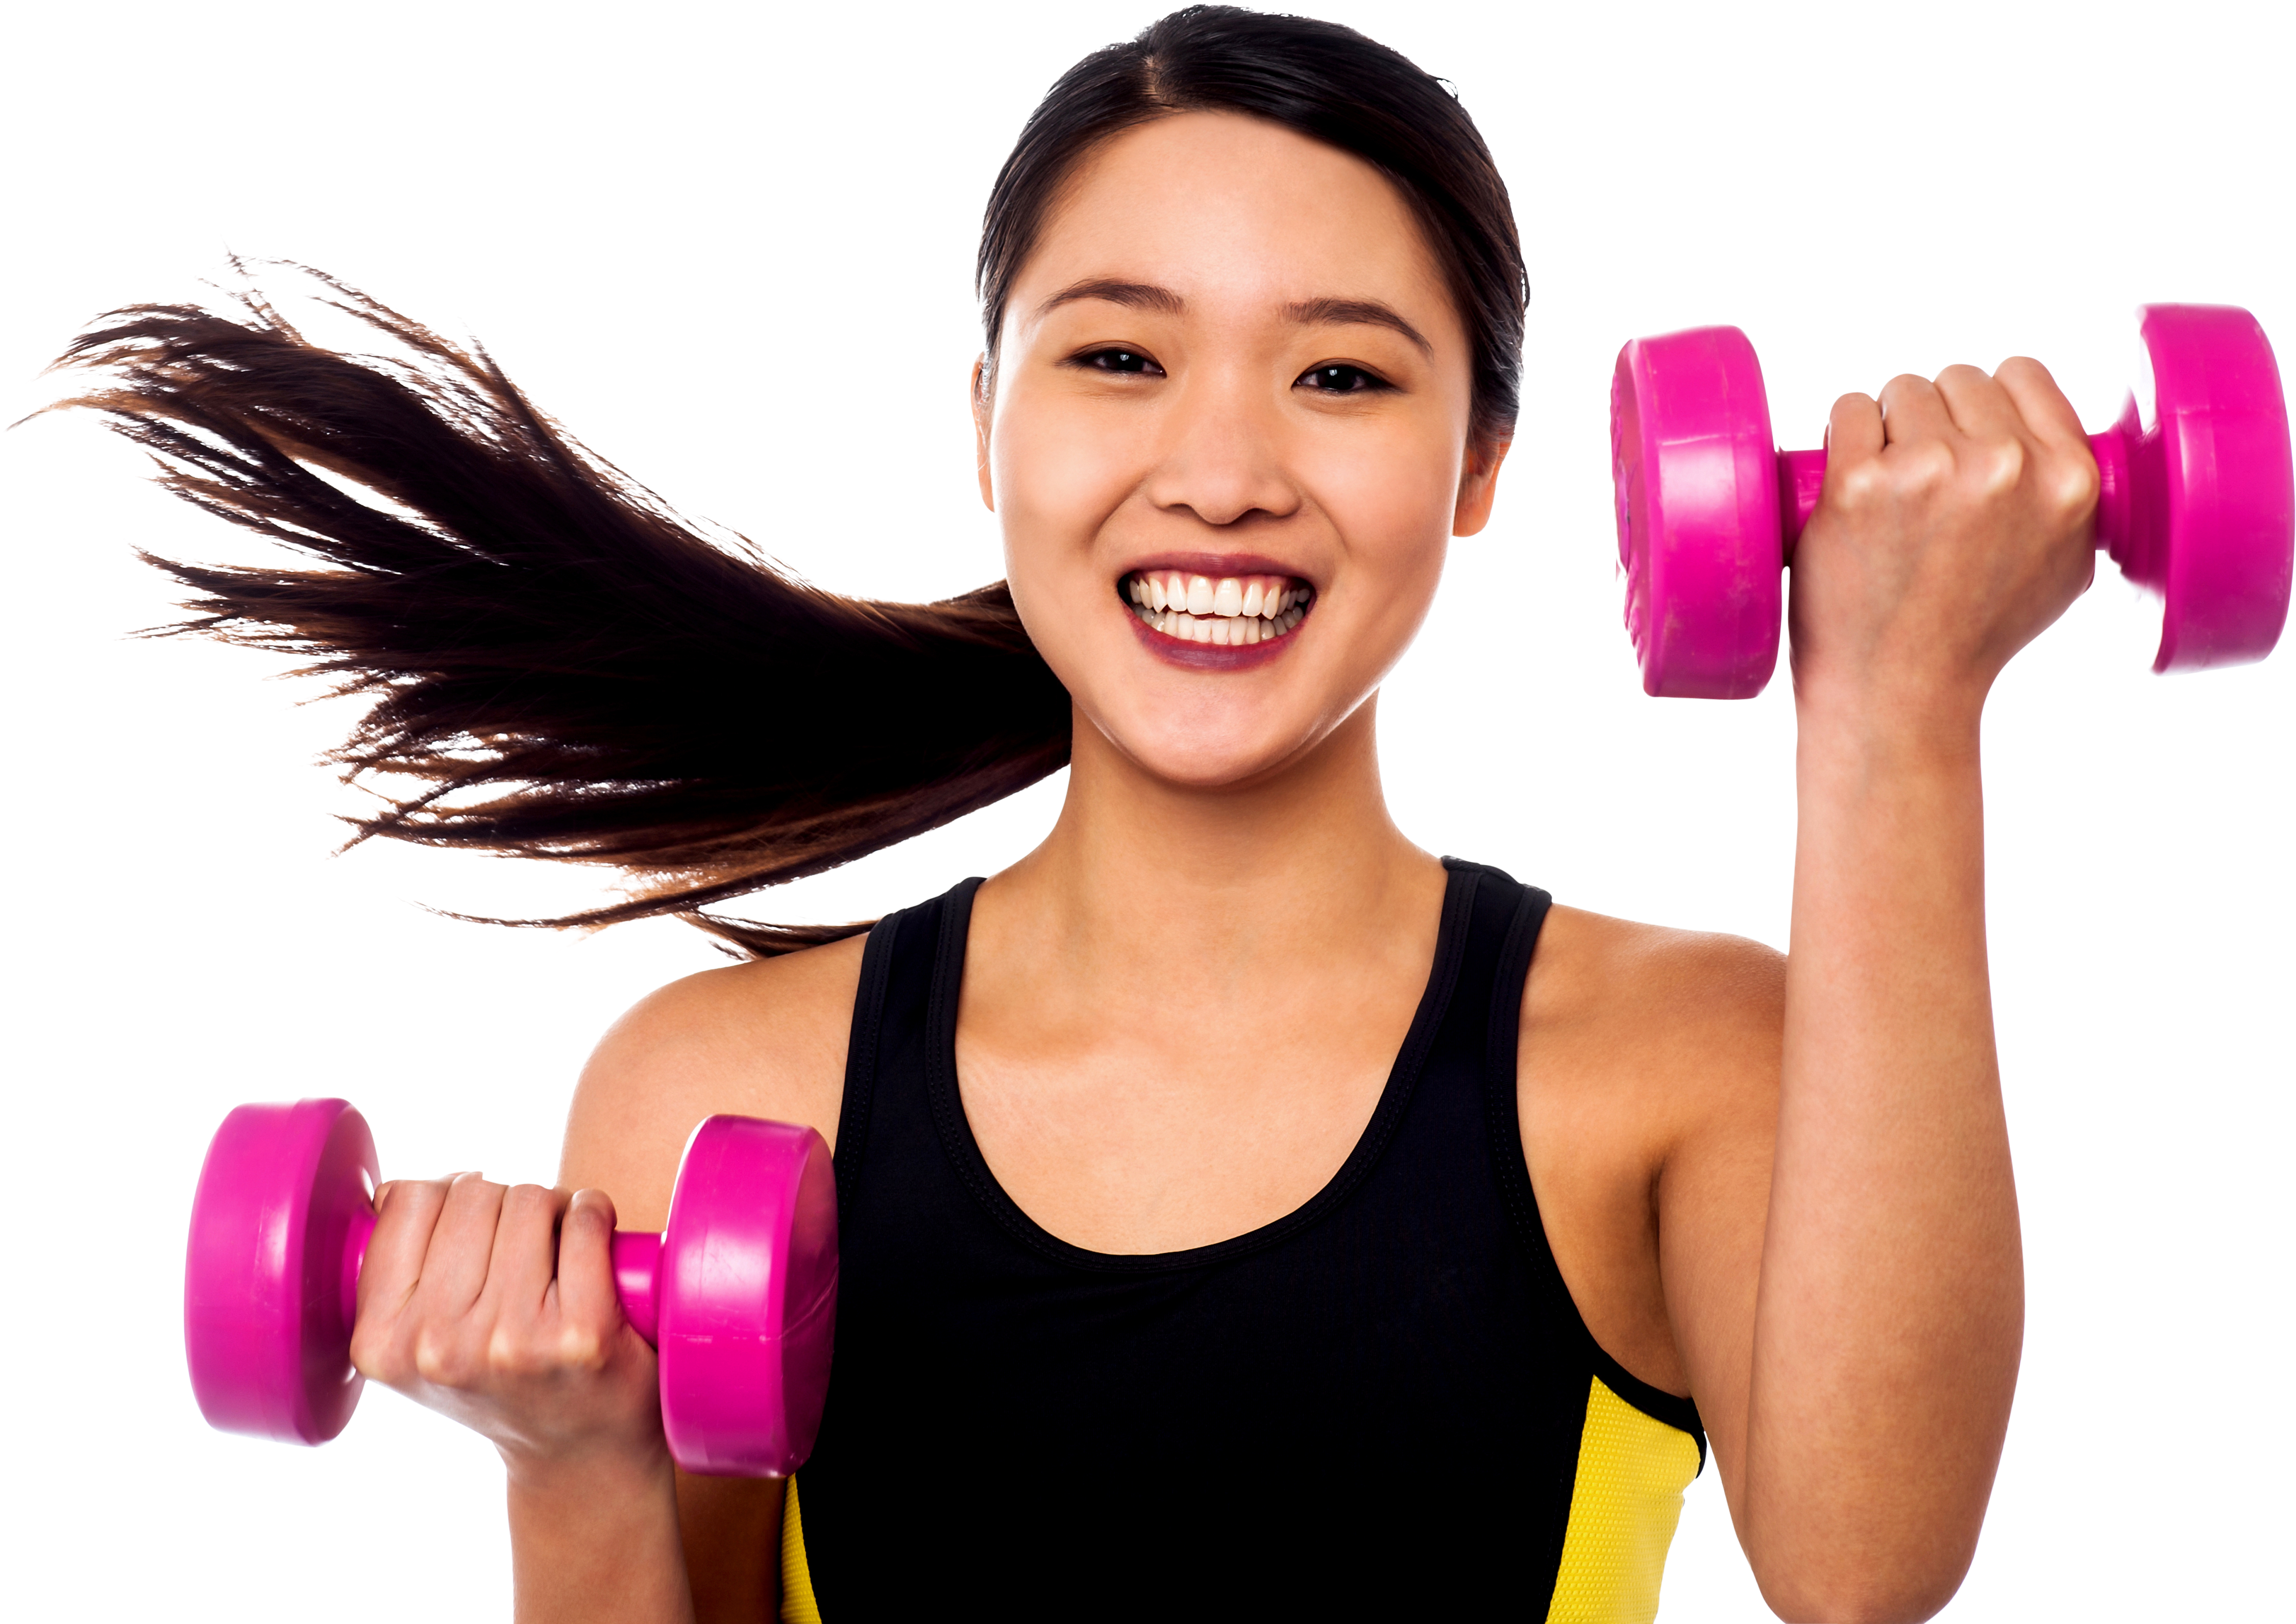 A Woman Lifting Weights With Her Hair Blowing In The Wind